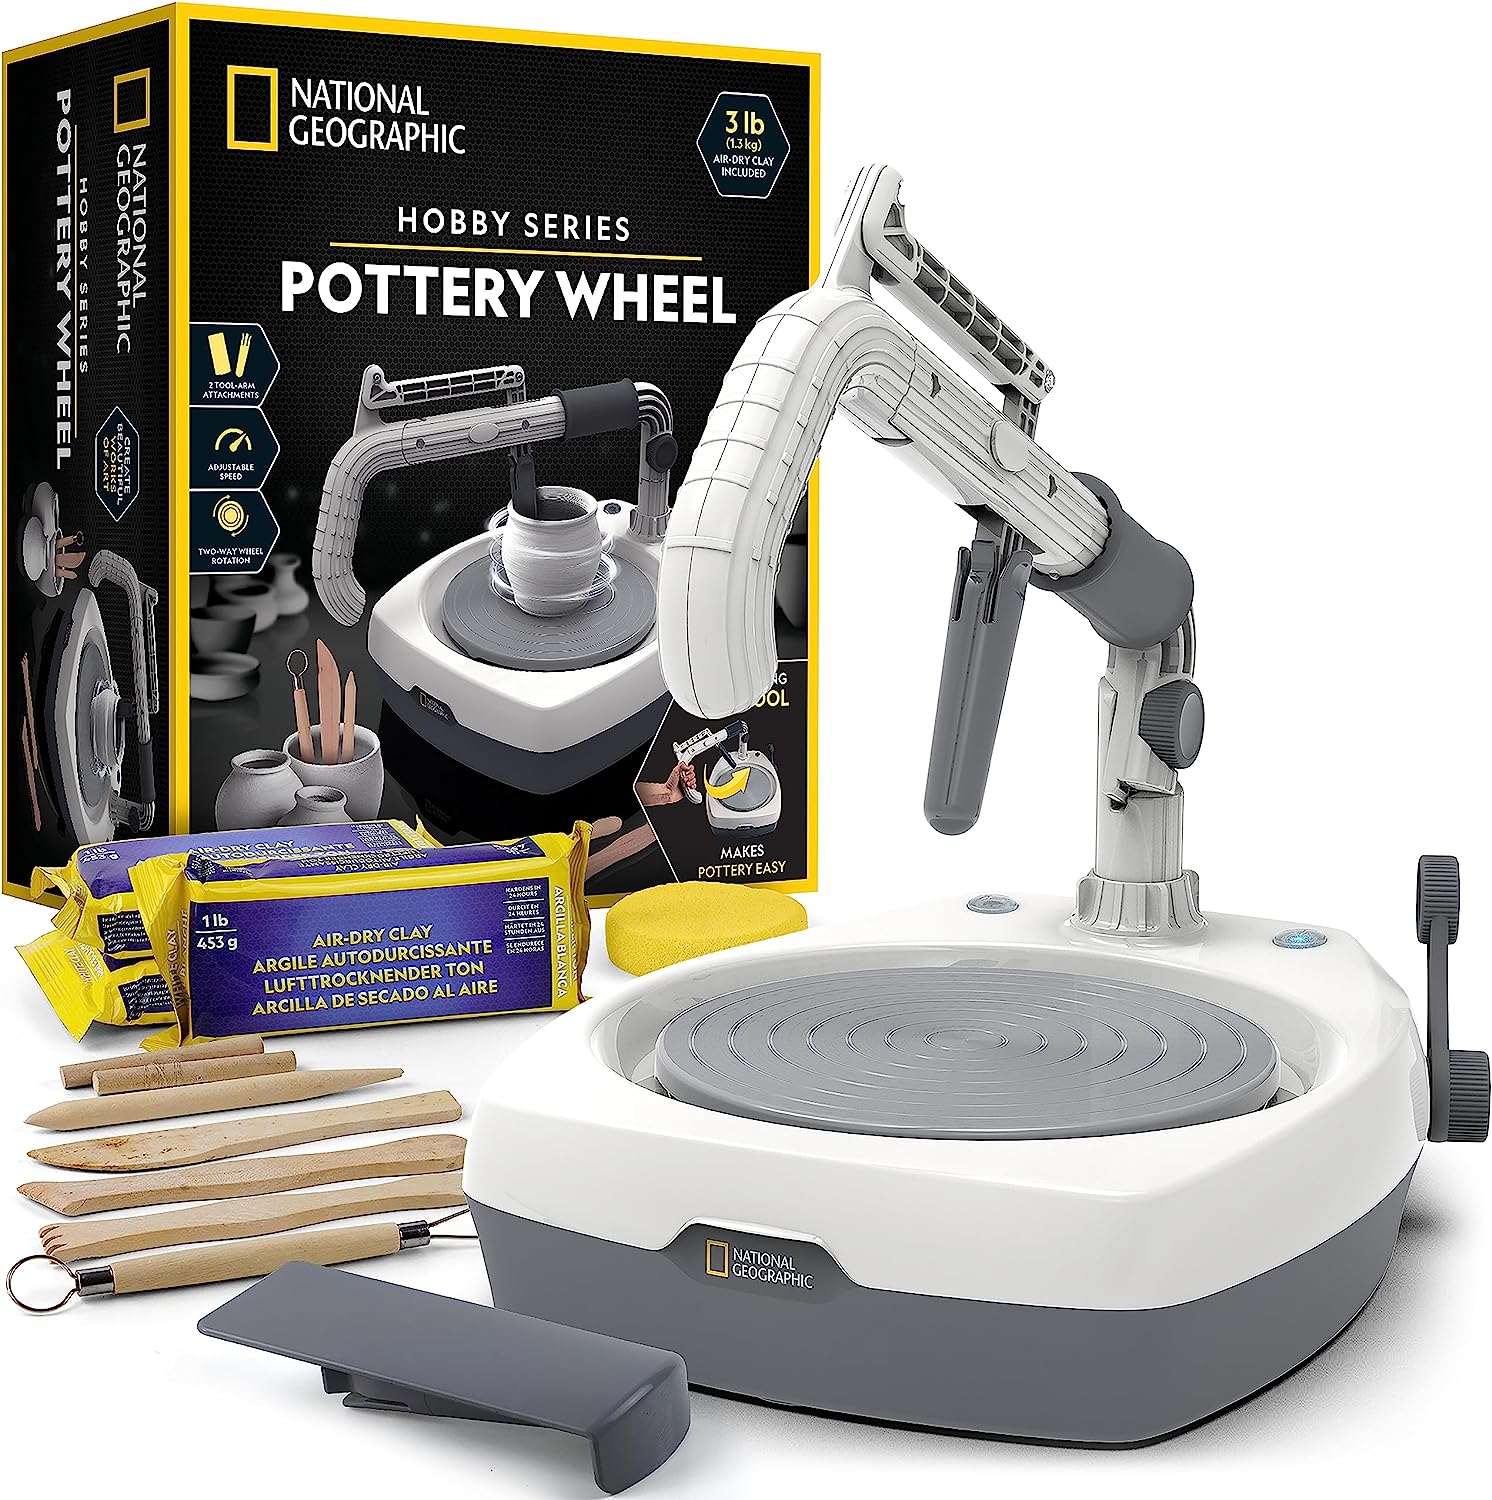 NATIONAL GEOGRAPHIC Hobby Pottery Wheel Kit - 8 Variable Speed Pottery  Wheel for Adults & Teens with Innovative Arm Tool, 3 Lb Air Dry Clay & Art  Supplies, Crafts for Adults, Craft Kits for Teenagers 